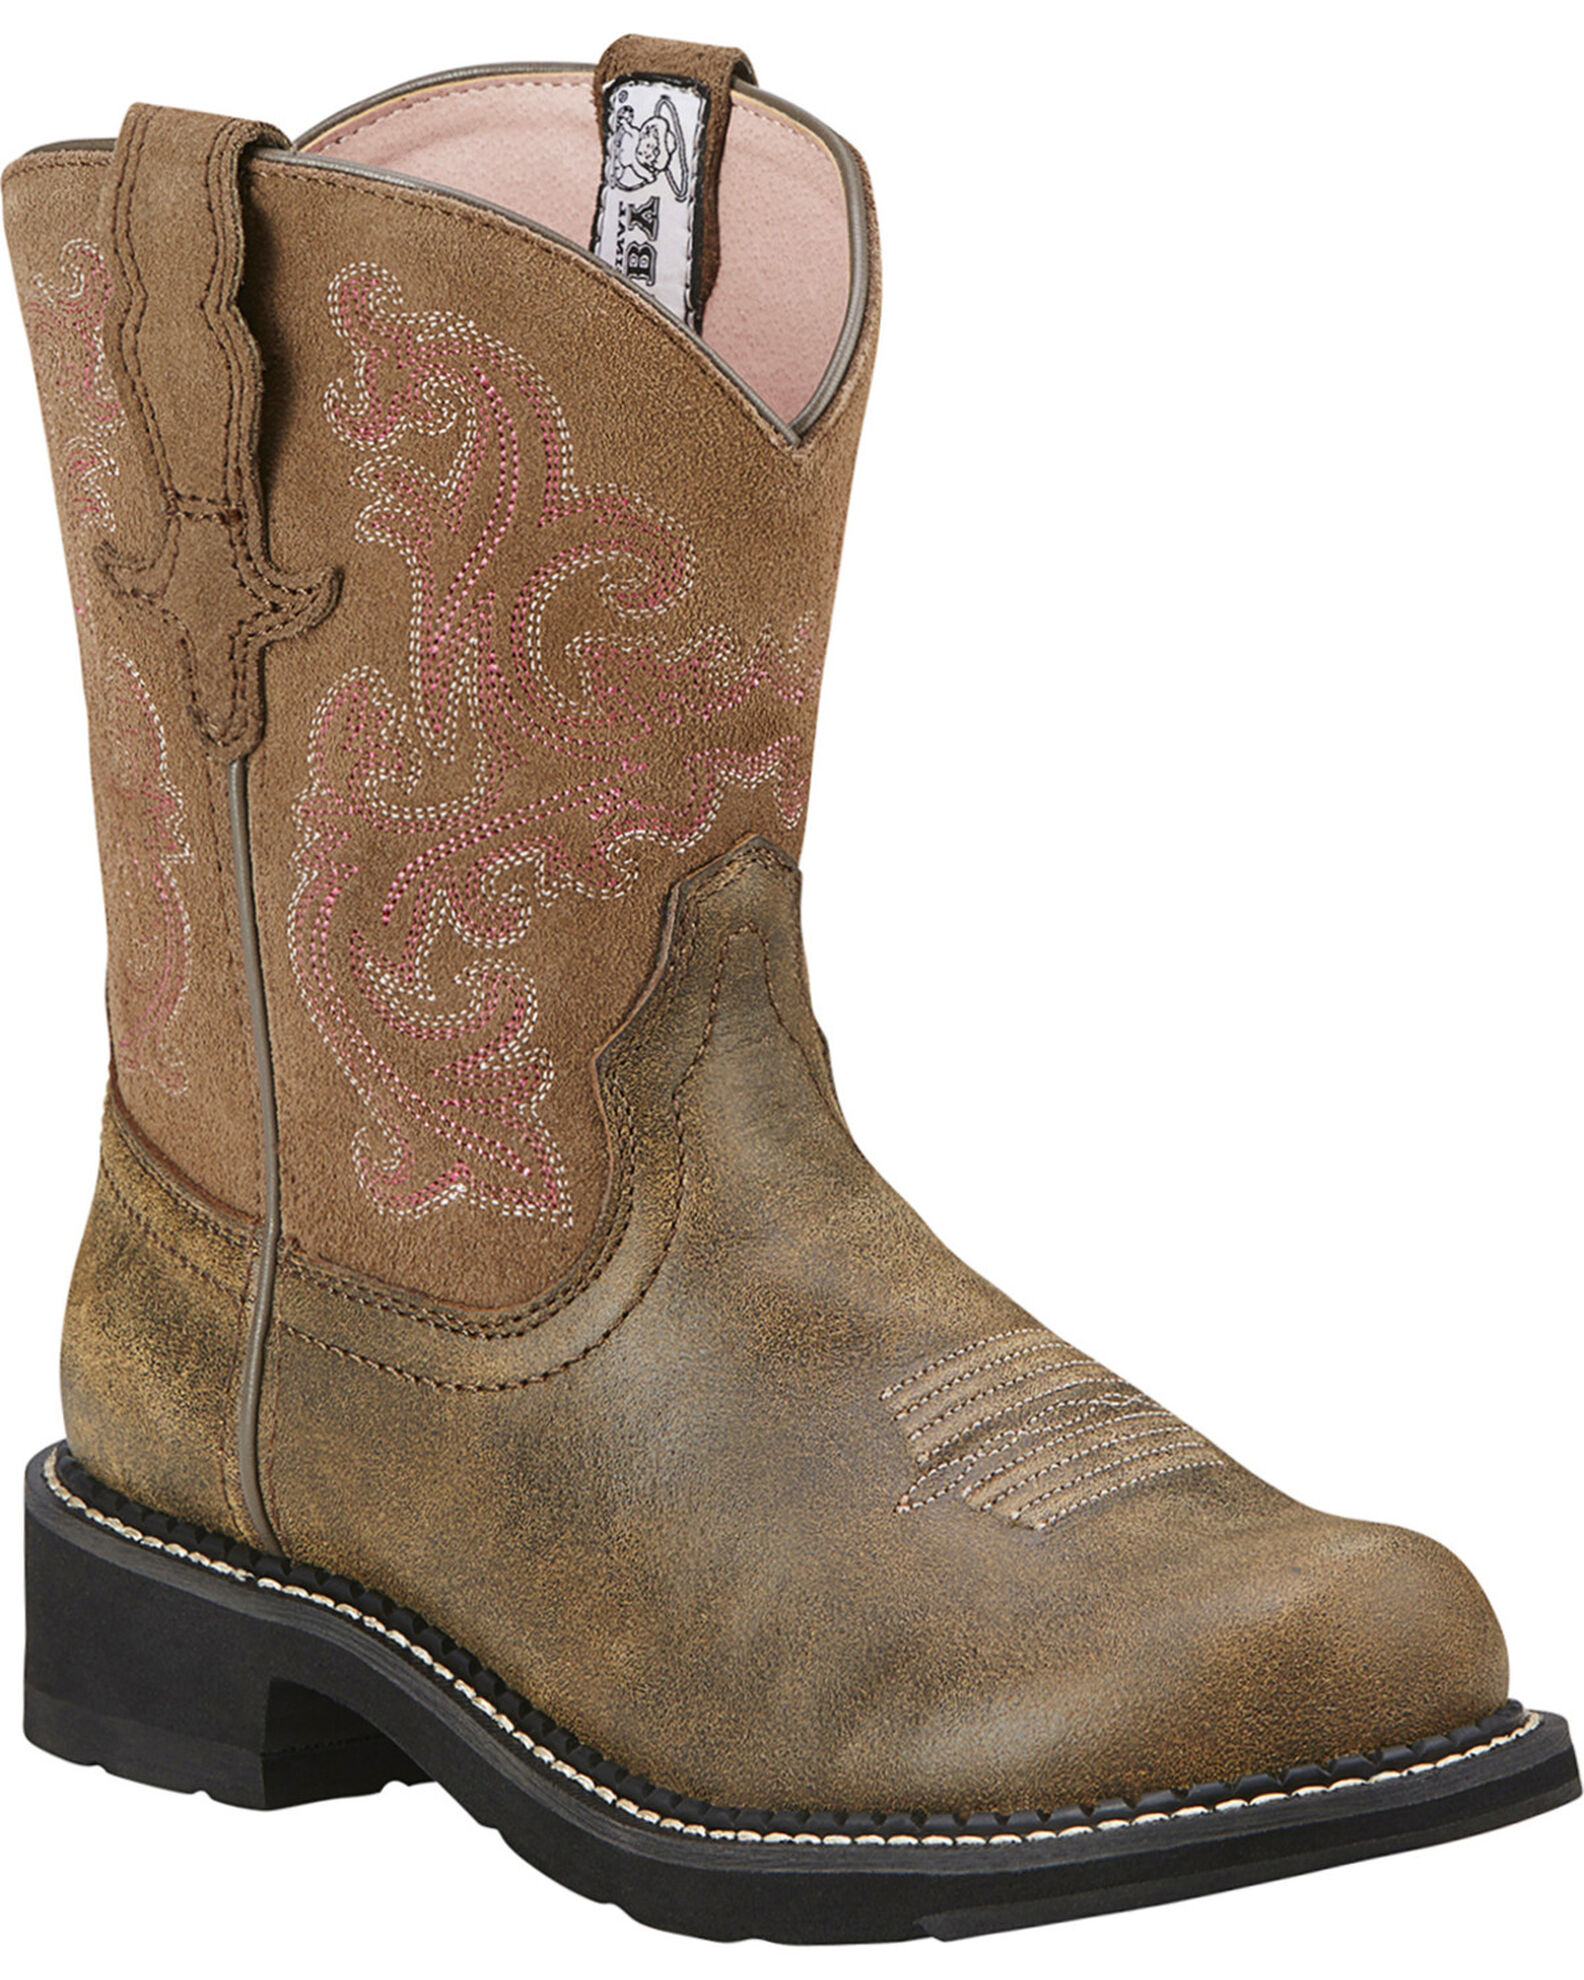 Ariat Fatbaby Brown Bomber Leather Boots Crepe Sole | Boot Barn